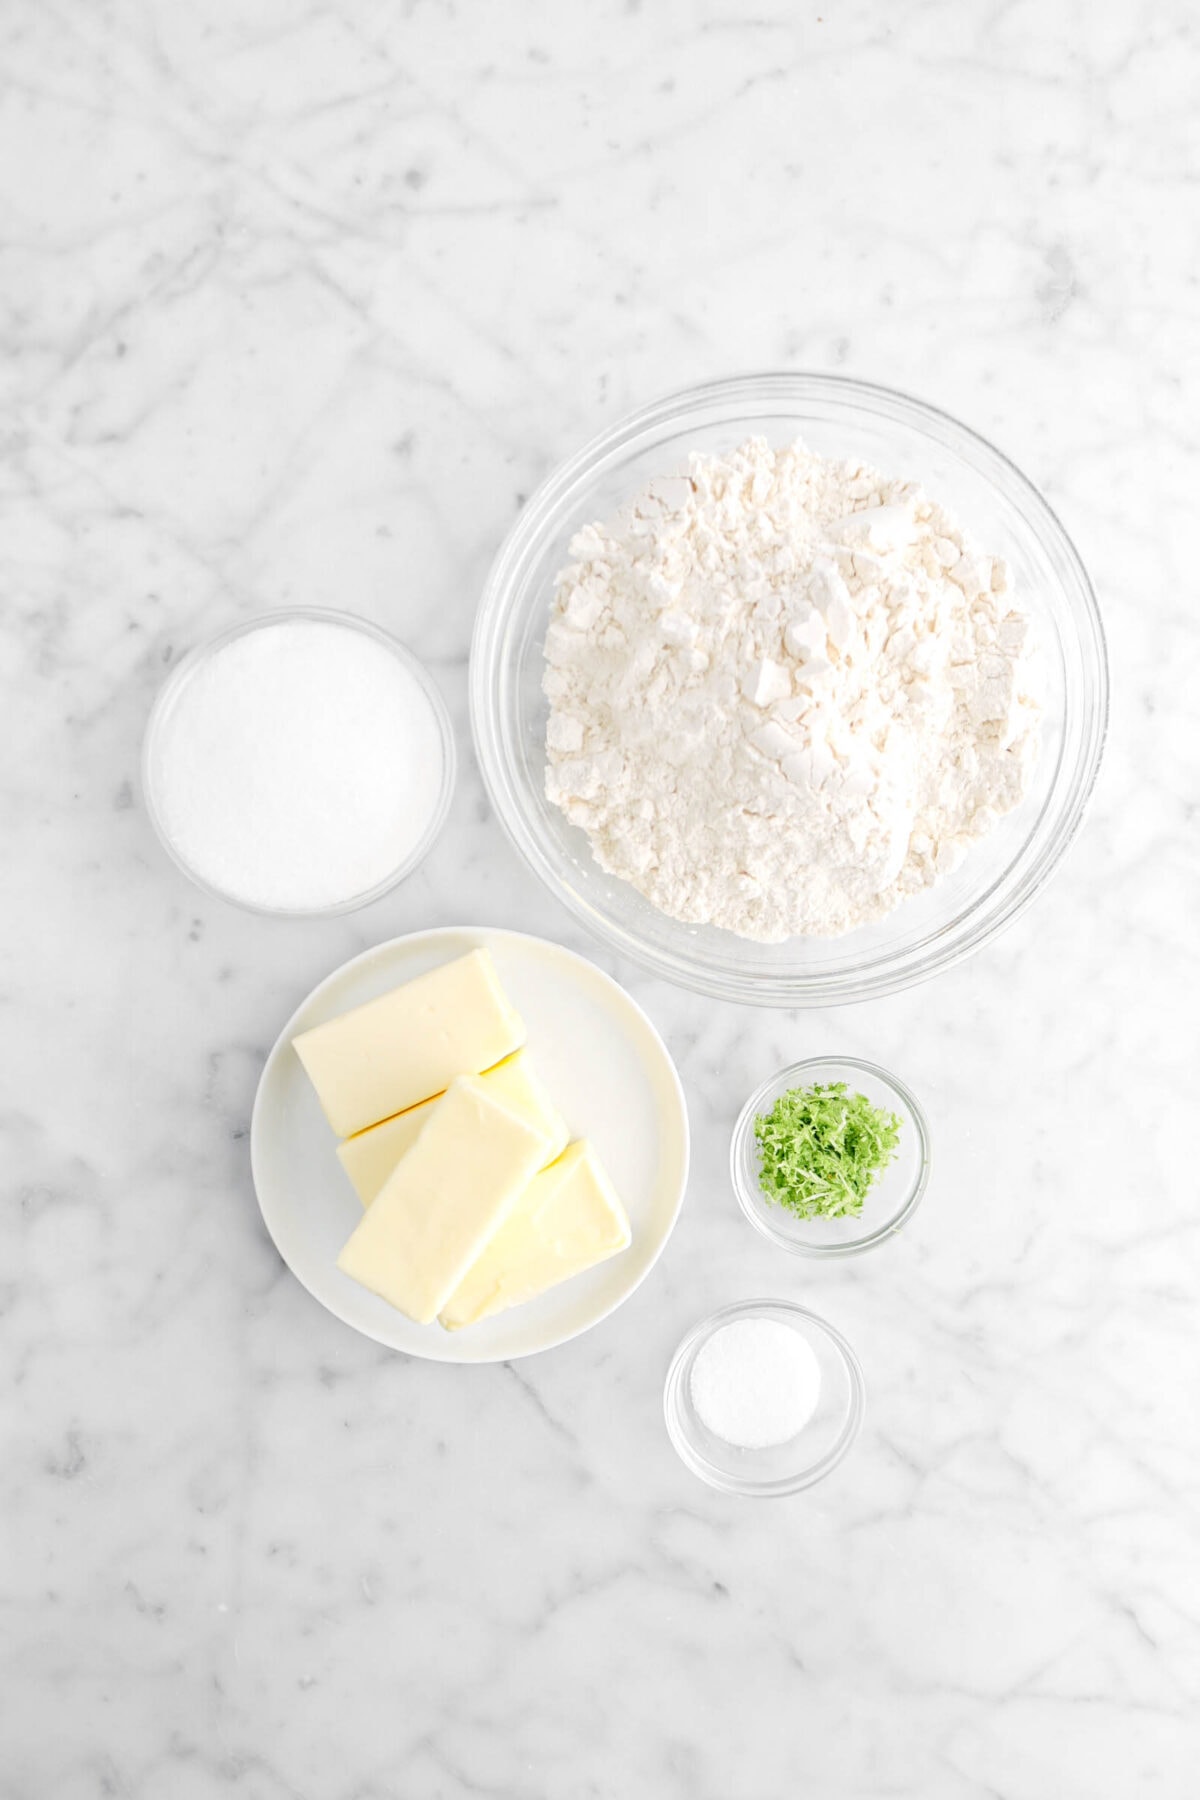 flour, sugar, butter, lime zest, and salt on marble counter